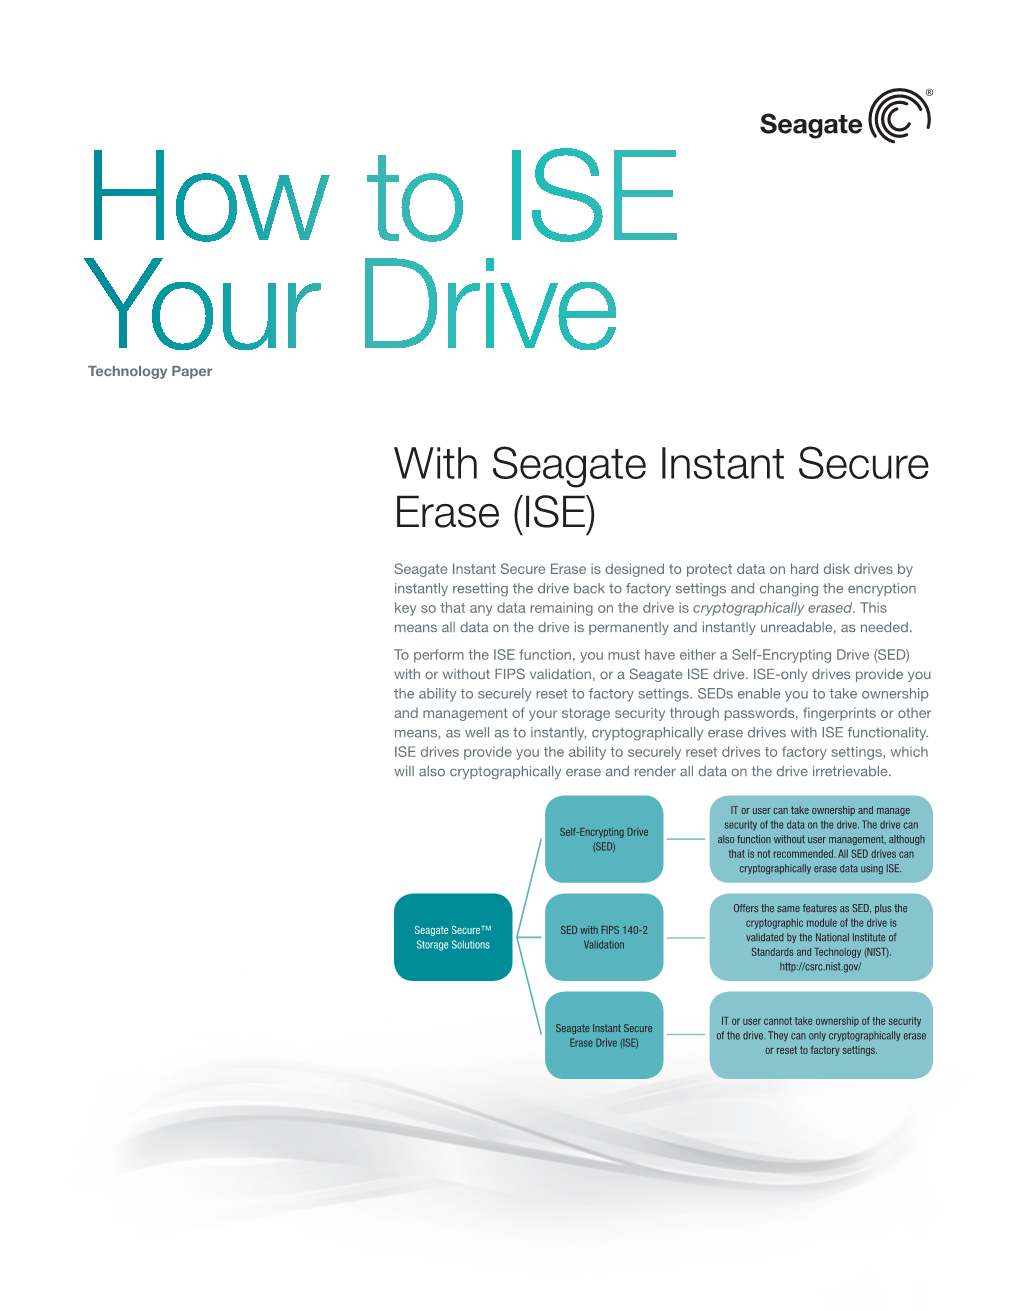 With Seagate Instant Secure Erase (ISE)